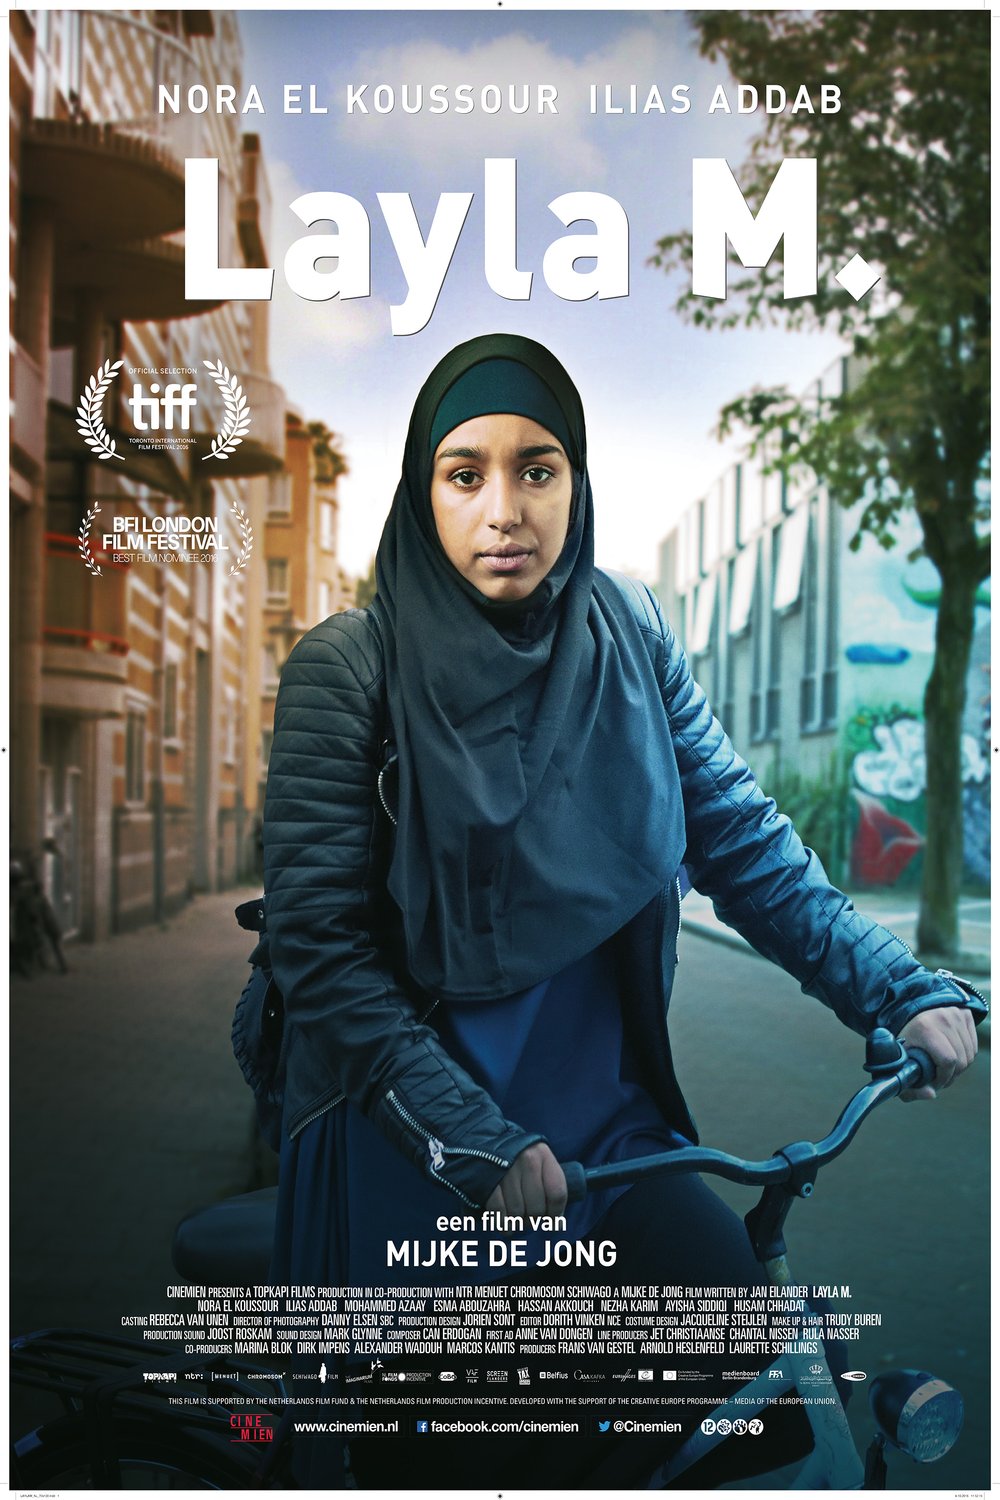 Arabic poster of the movie Layla M.